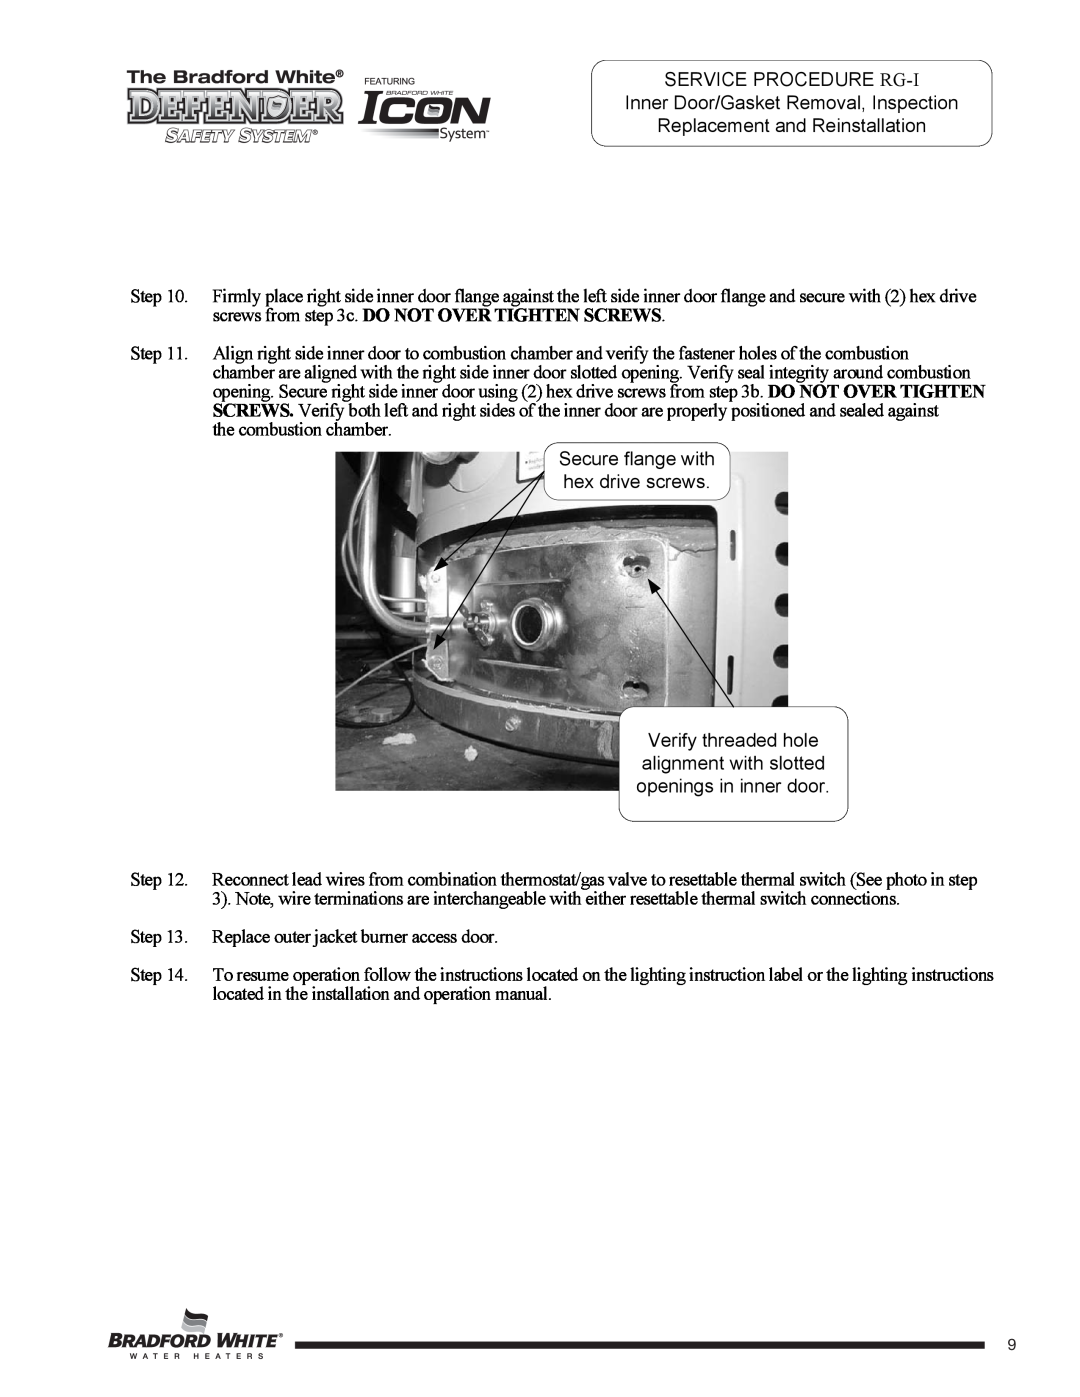 Bradford-White Corp Flammable Vapor Ignition Risistant Water Heaters service manual the combustion chamber 